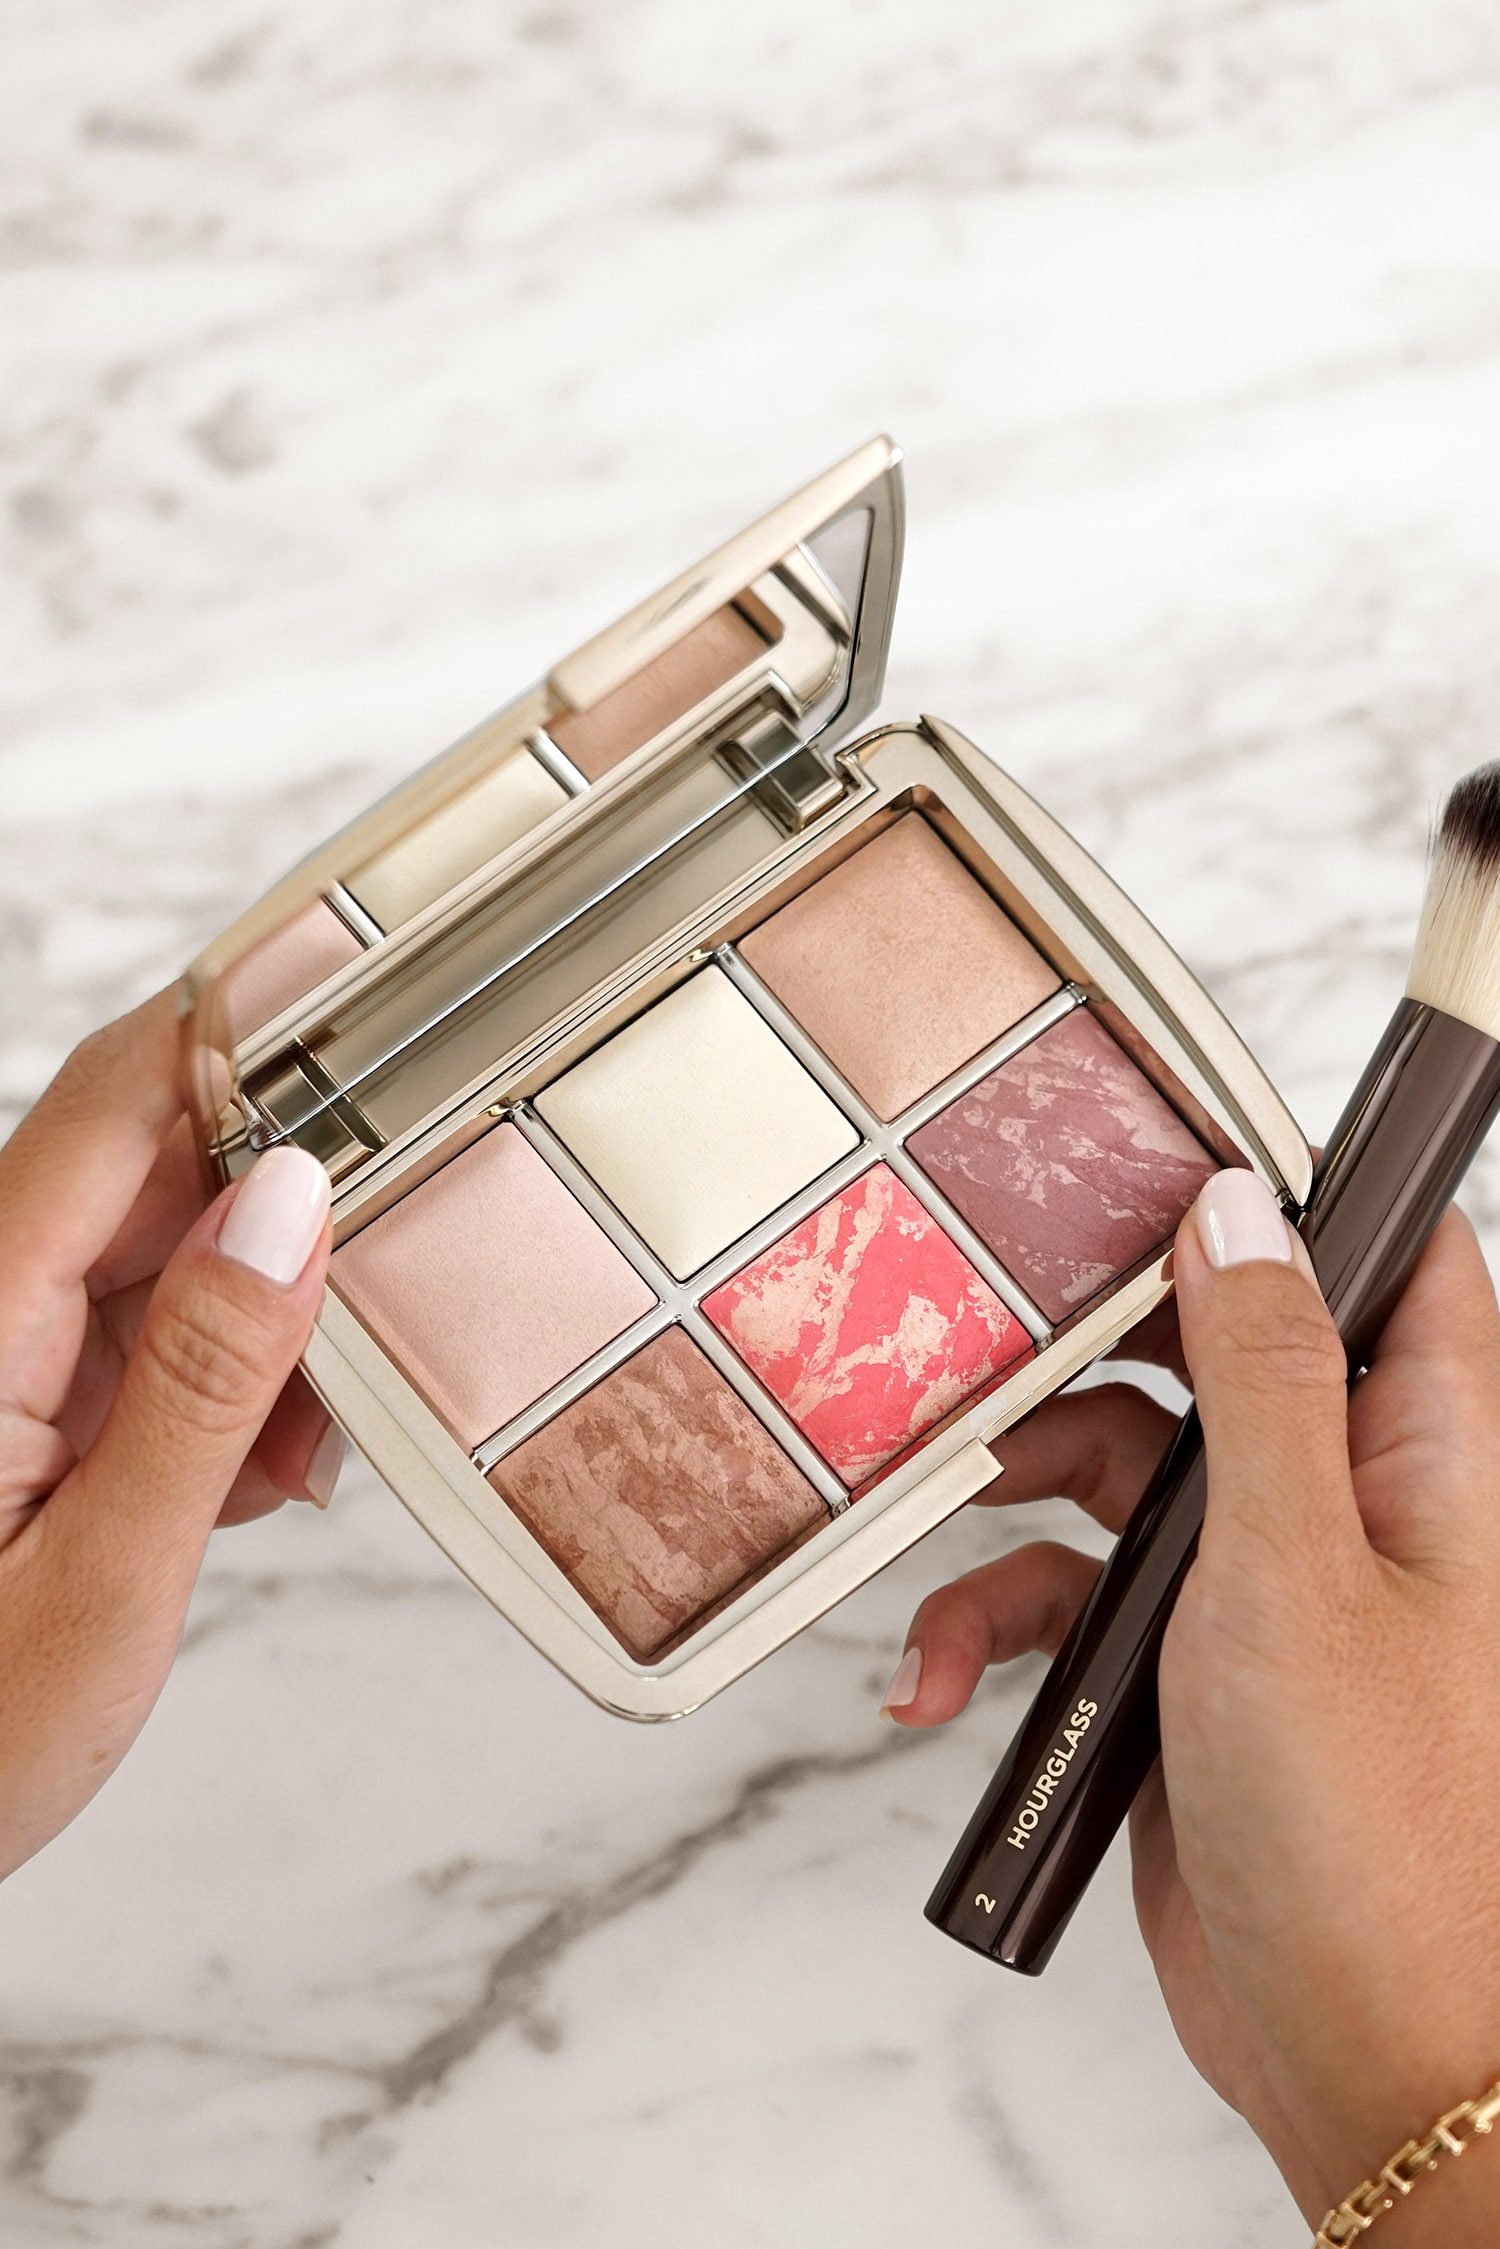 Hourglass Cosmetics Sculpture Holiday Collection - The Beauty Look